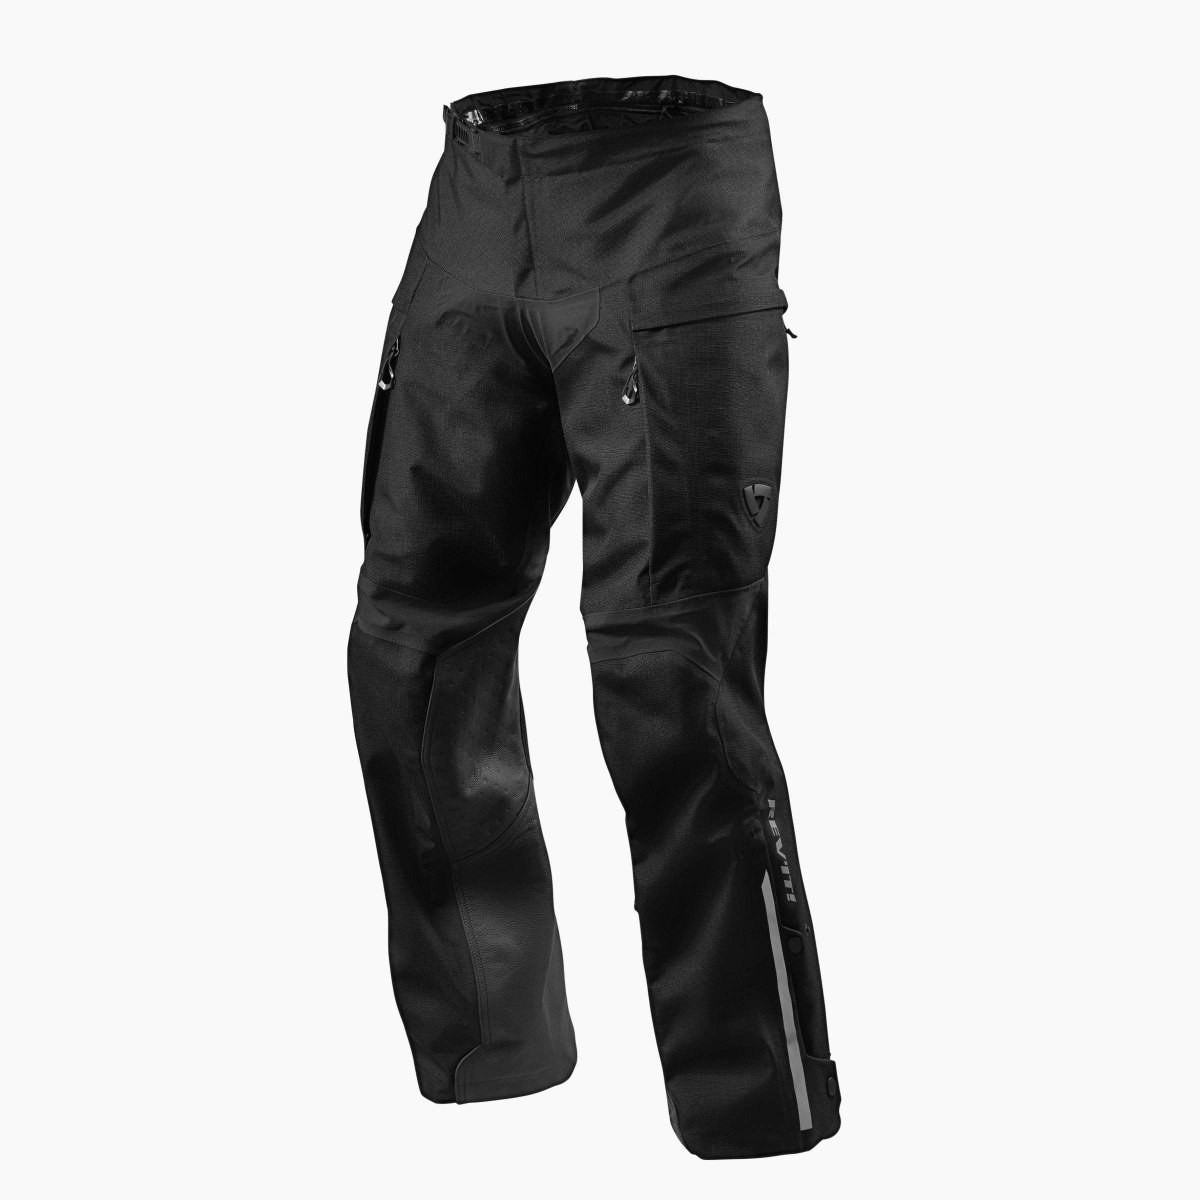 Image of REV'IT! Component H2O Standard Black Motorcycle Pants Talla S